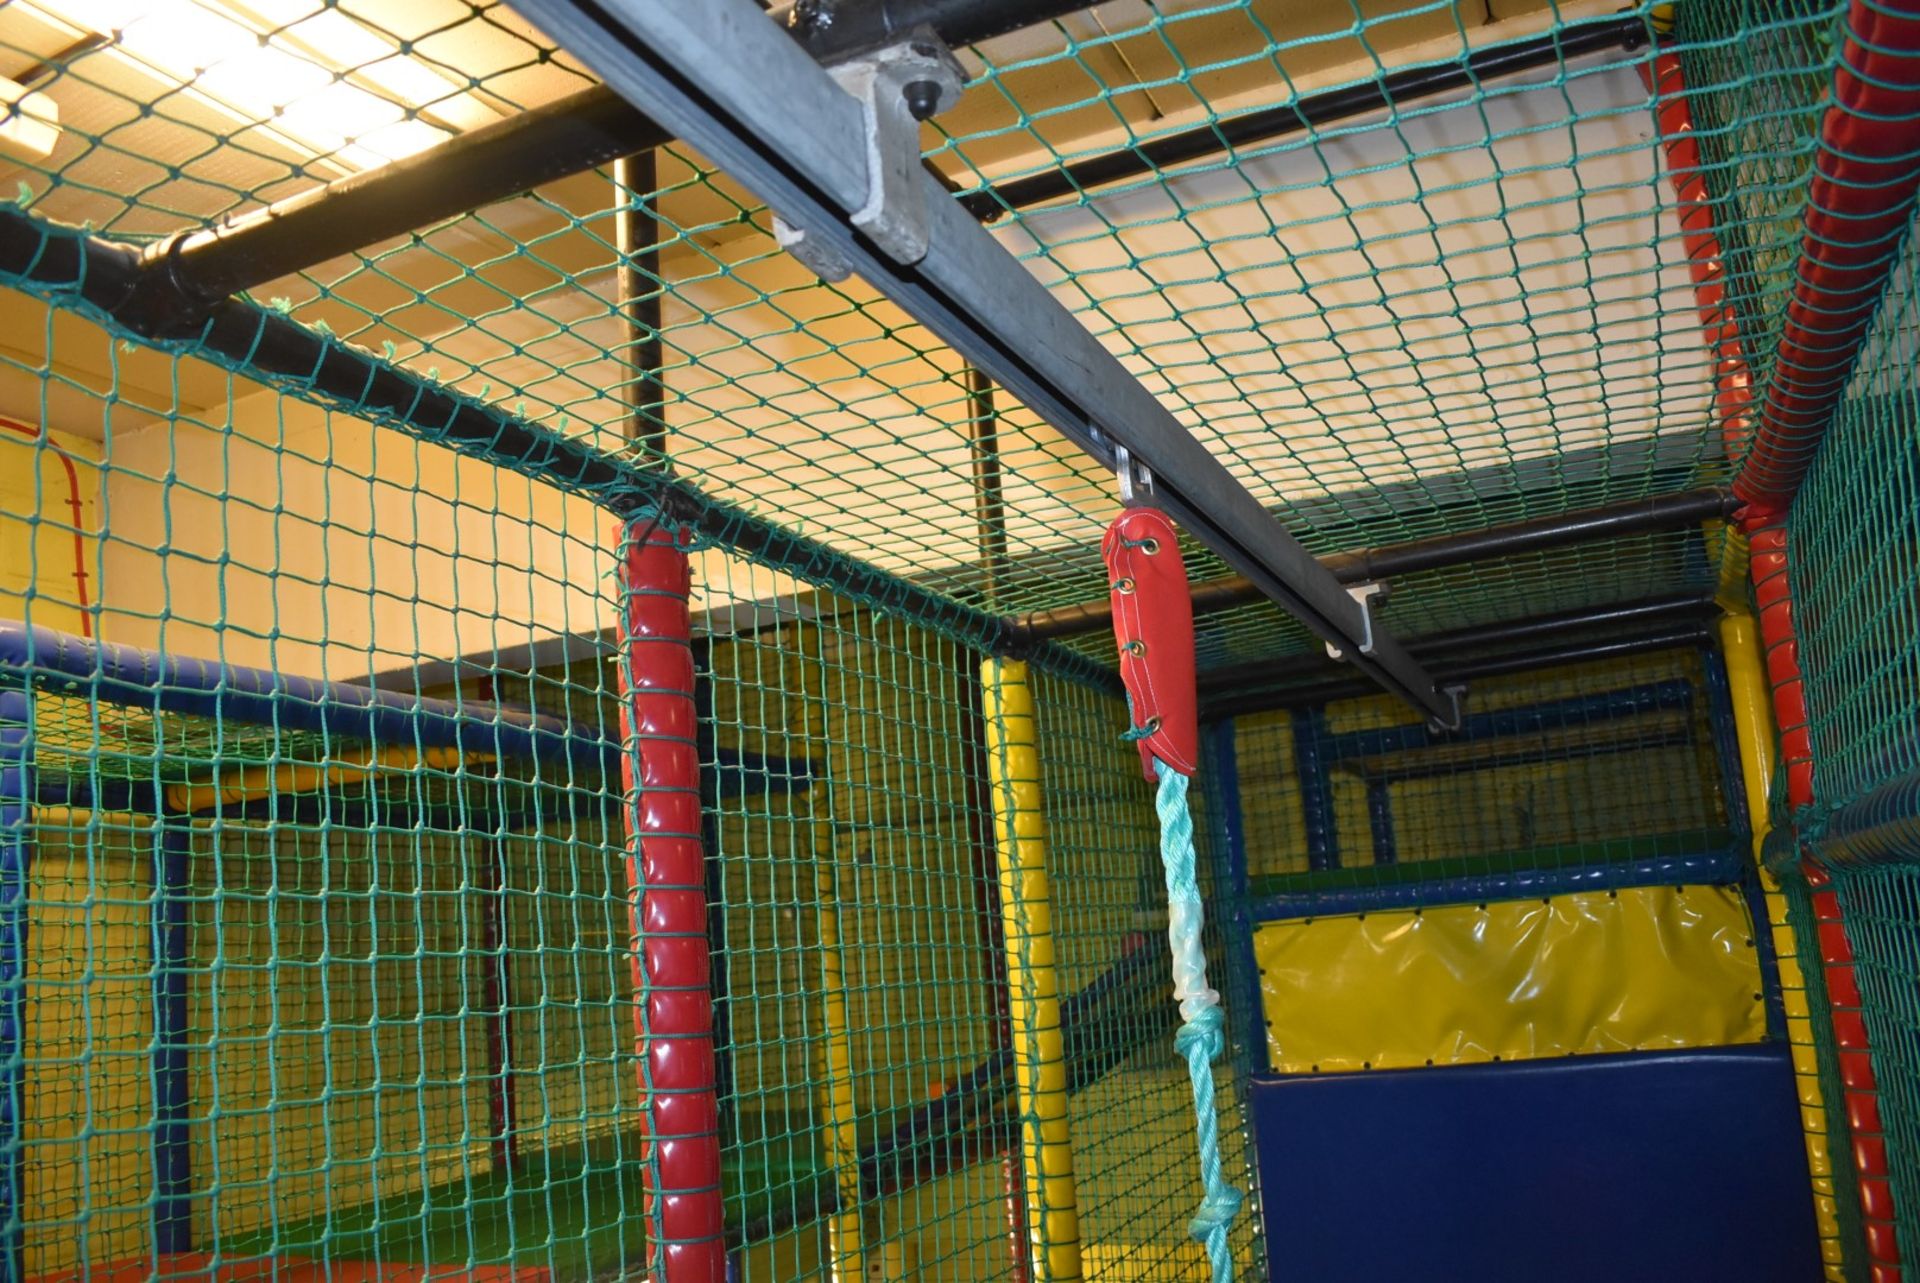 Bramleys Big Adventure Playground - Giant Action-Packed Playcentre With Slides, Zip Line Swings, - Image 46 of 128